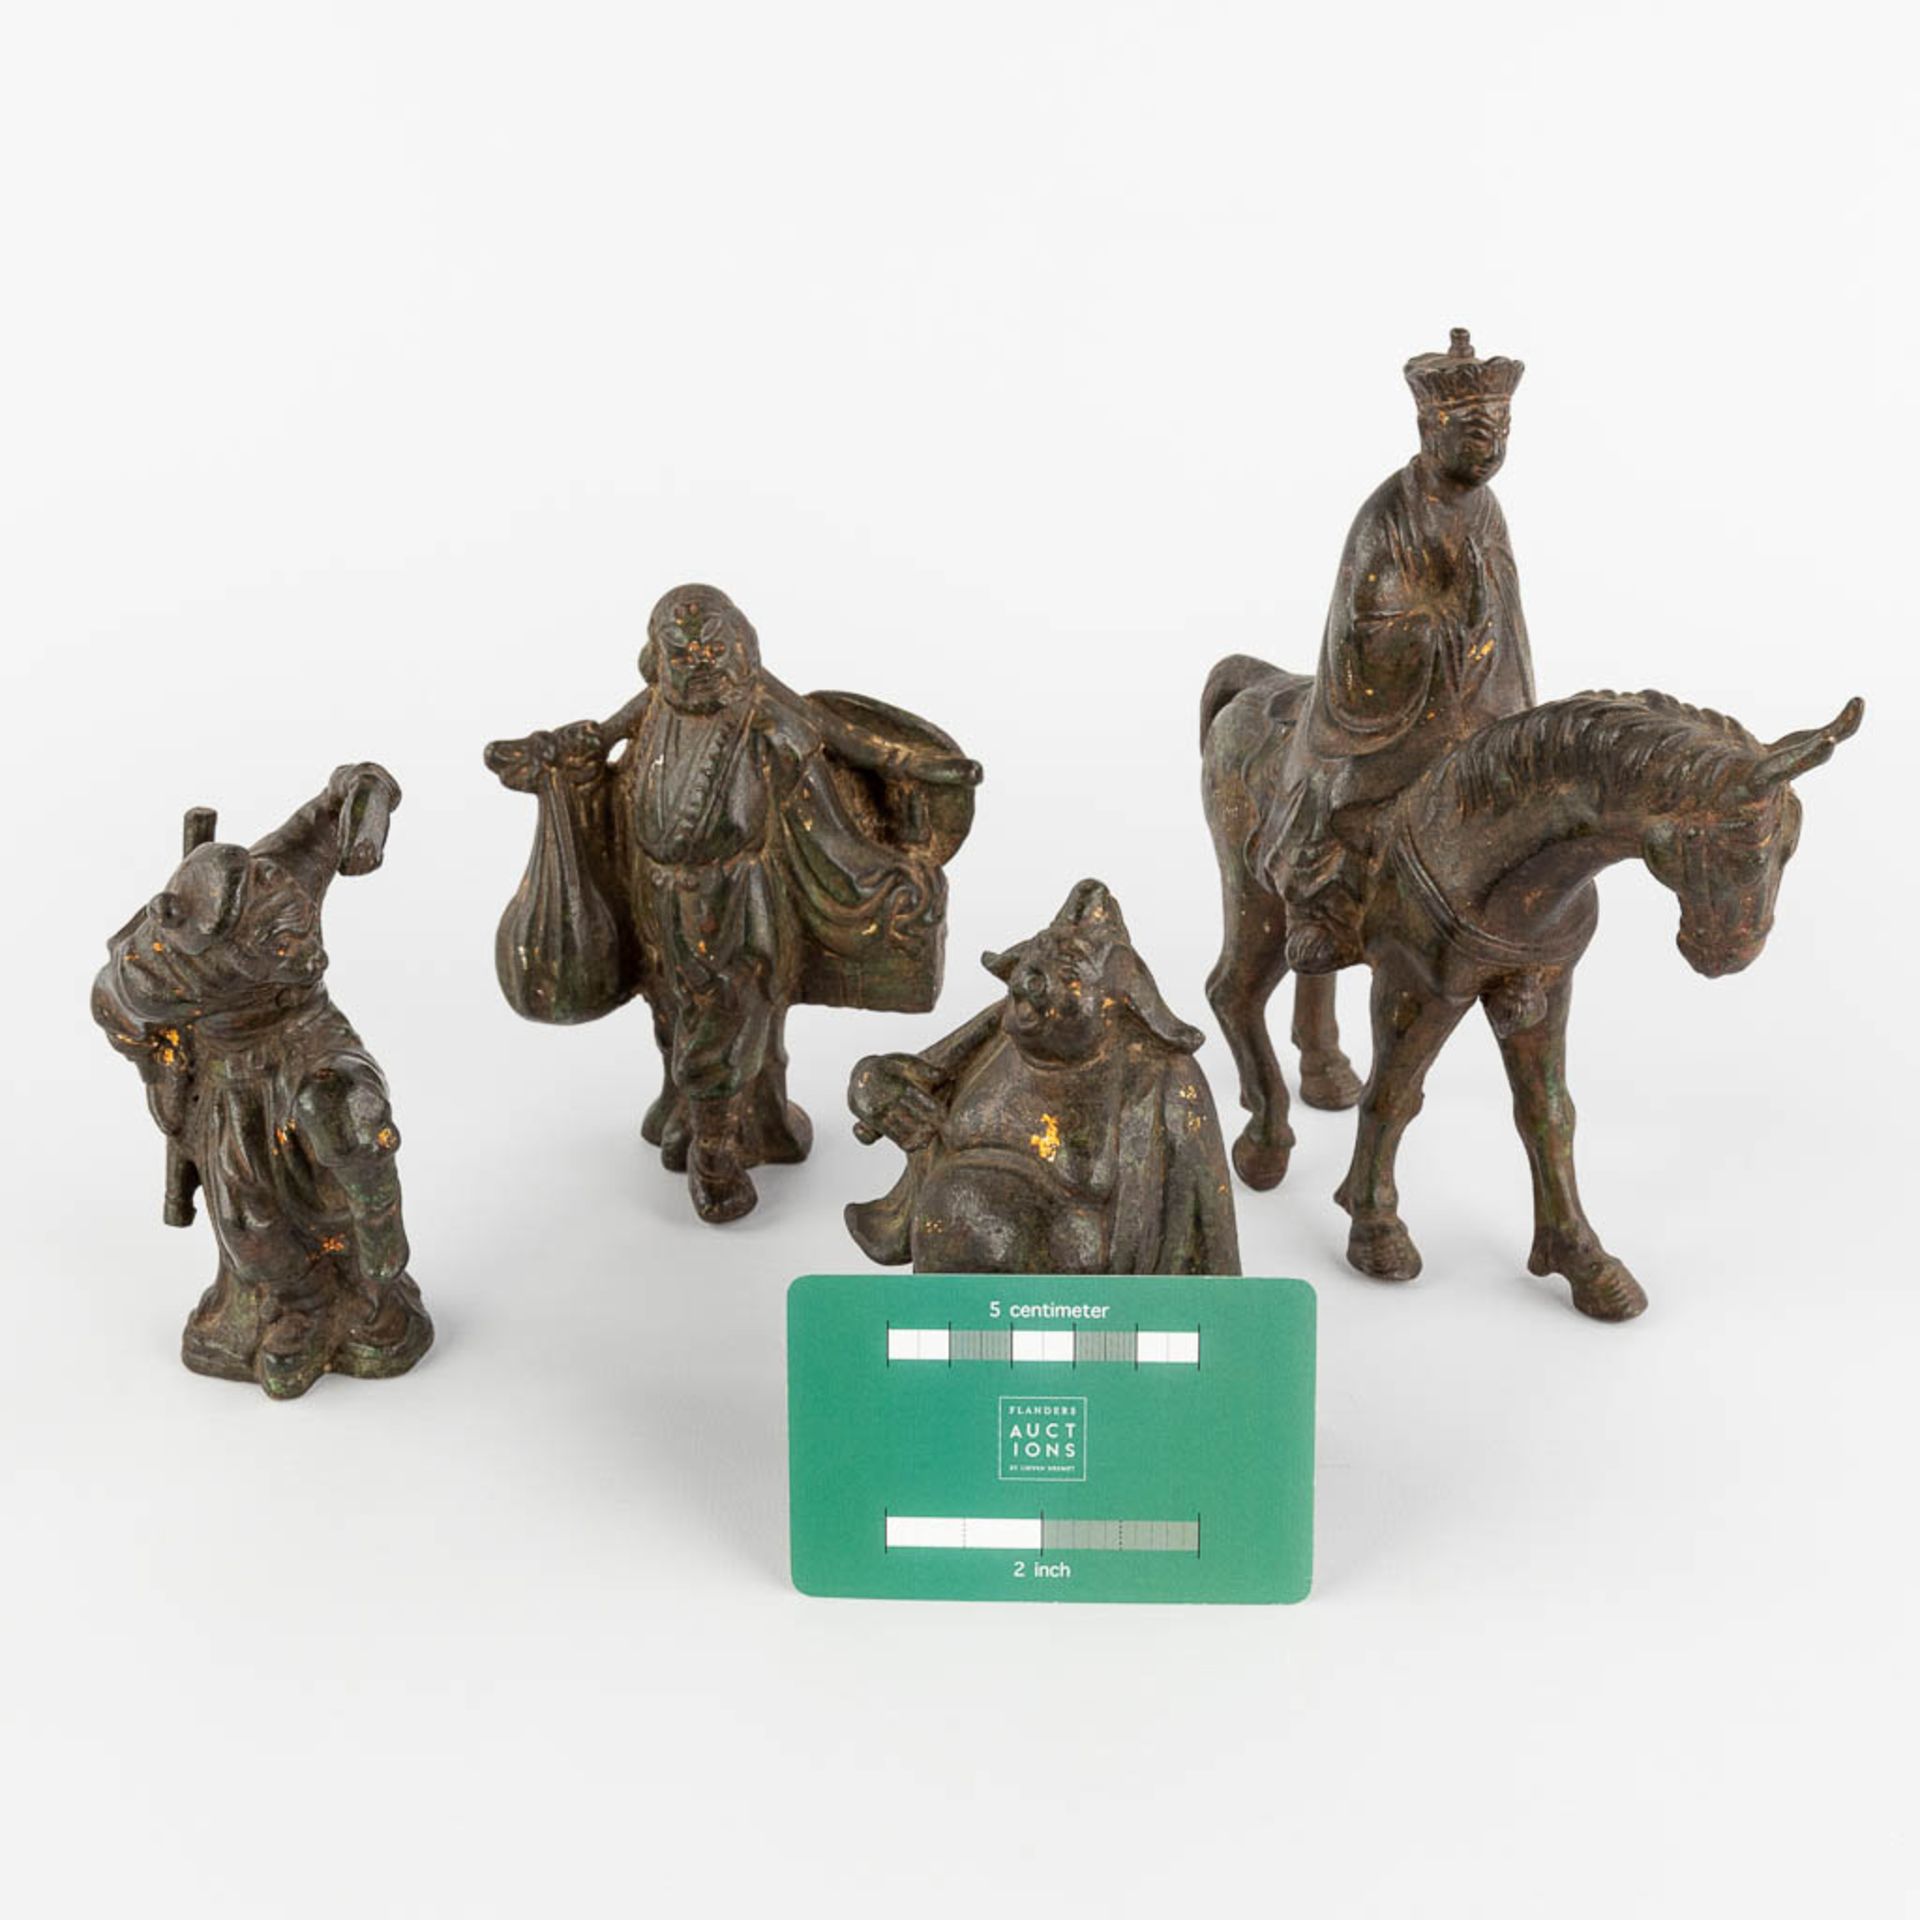 4 Chinese figurines, made of bronze. (L:7 x W:18 x H:18 cm) - Image 2 of 12